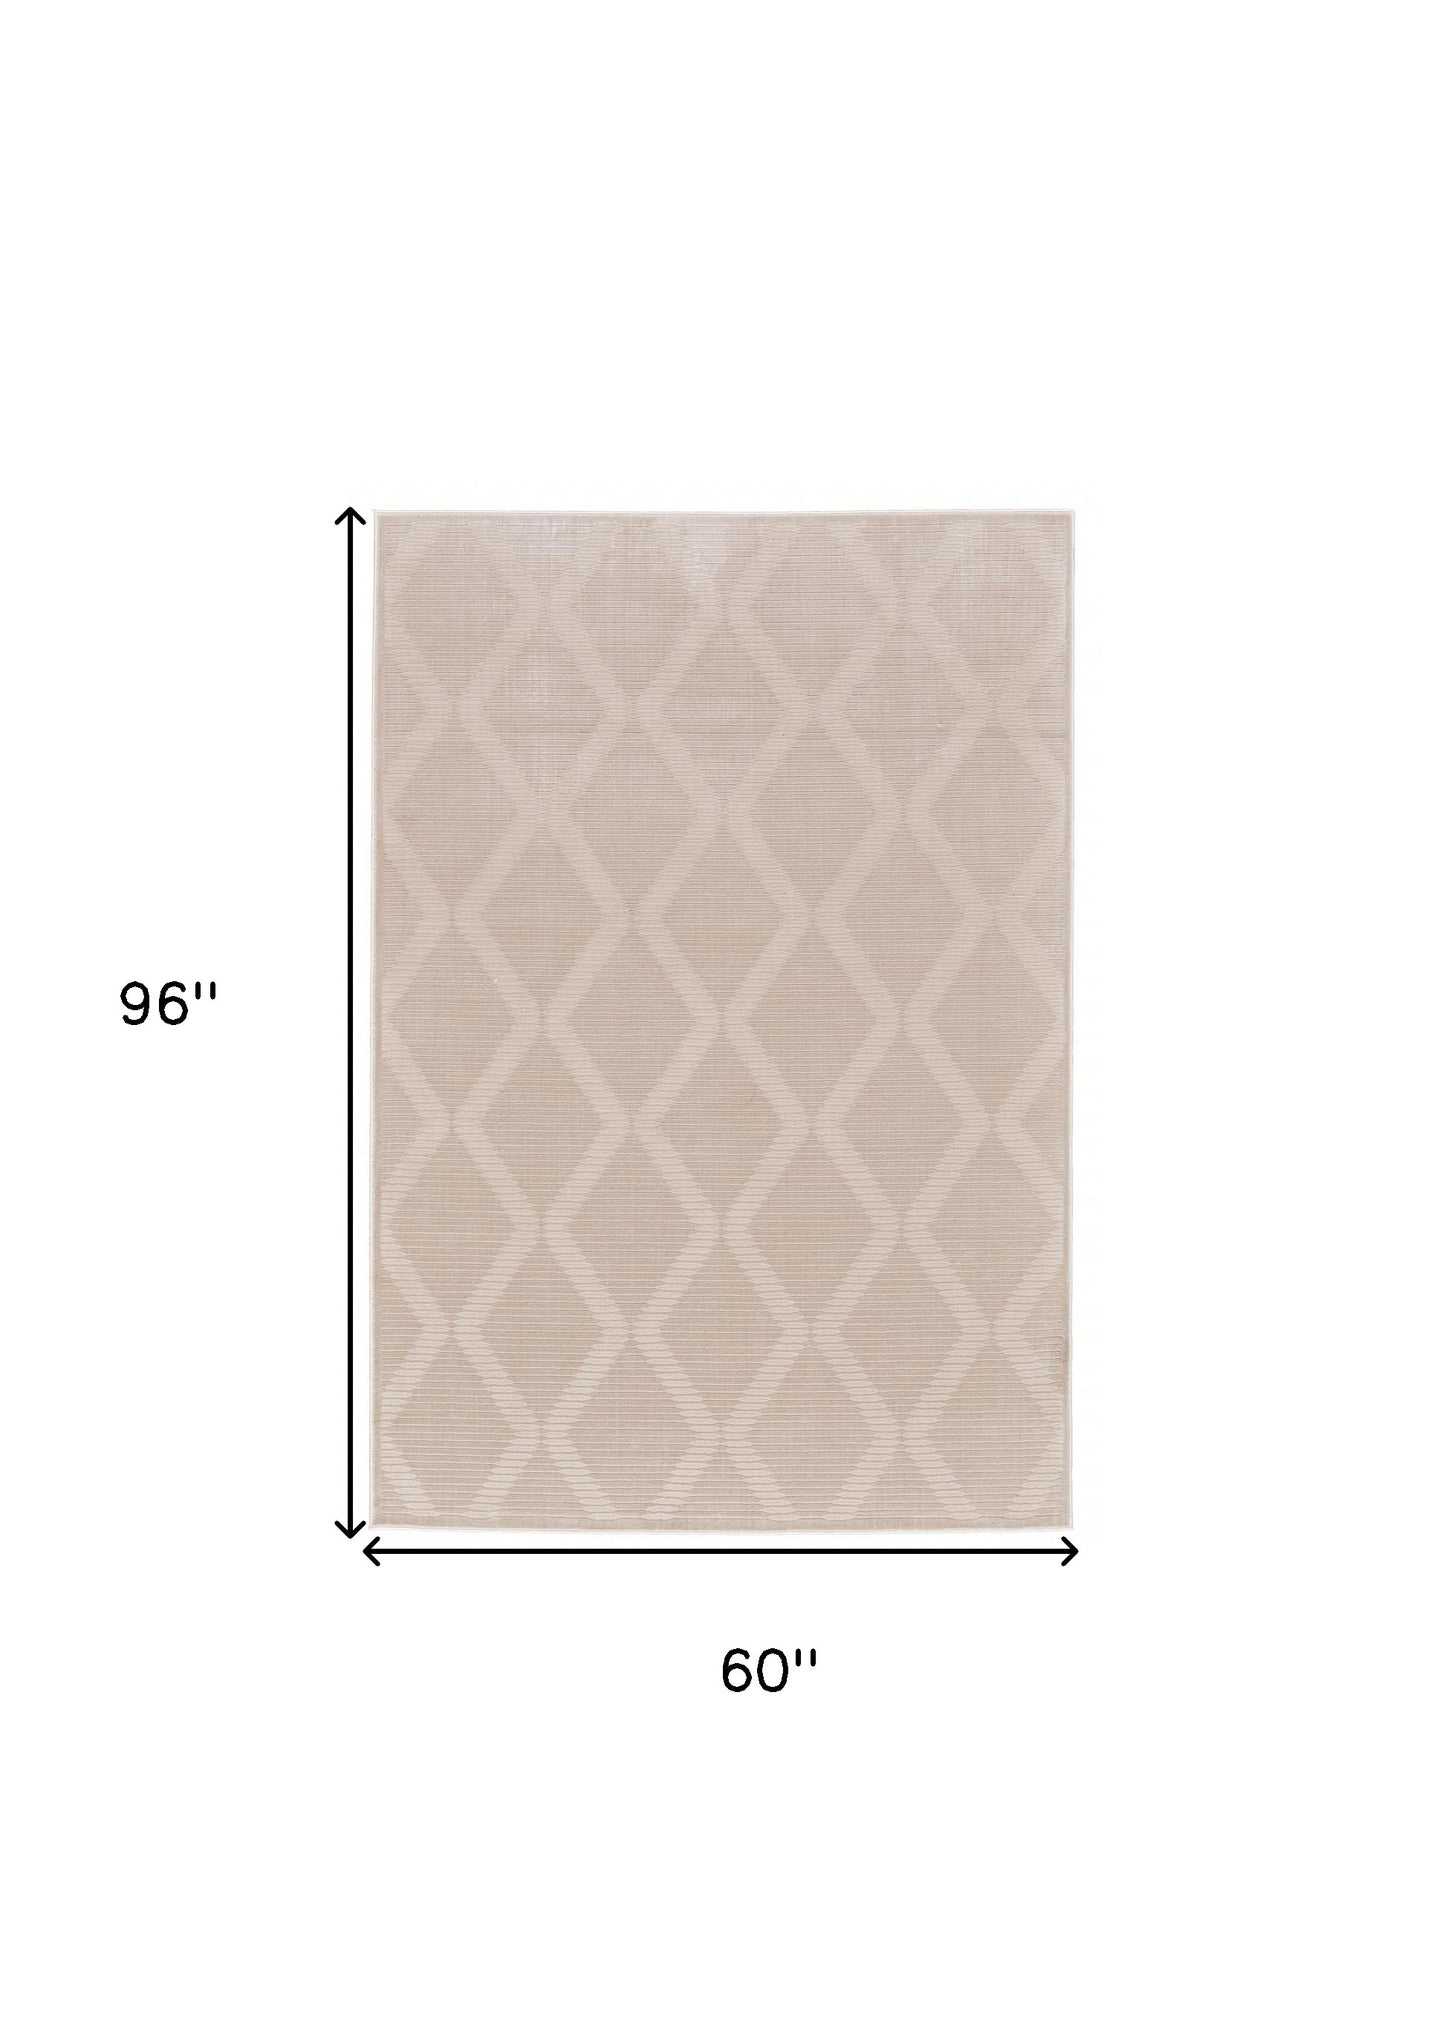 5' X 8' Ivory And Tan Geometric Stain Resistant Area Rug